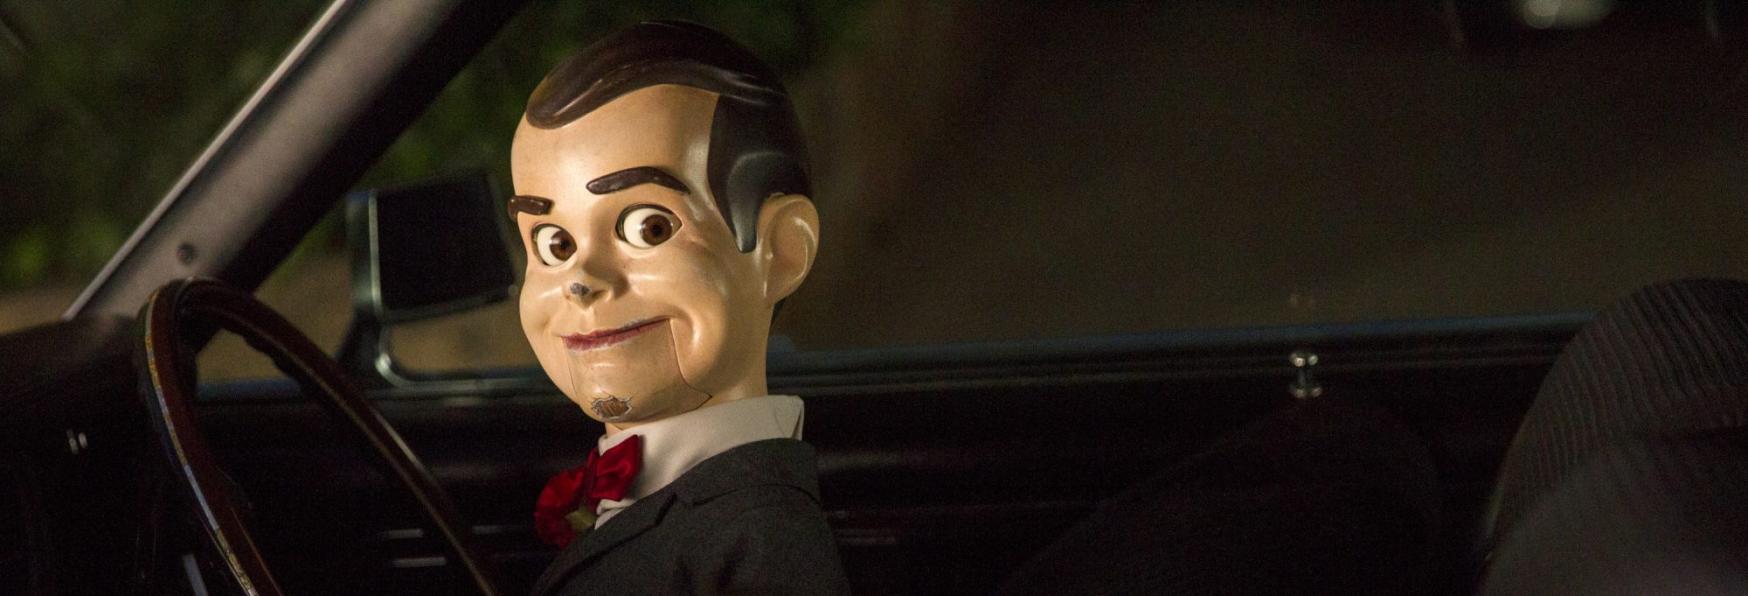 Goosebumps: A New Actor Joins the Cast of the Disney+ Series